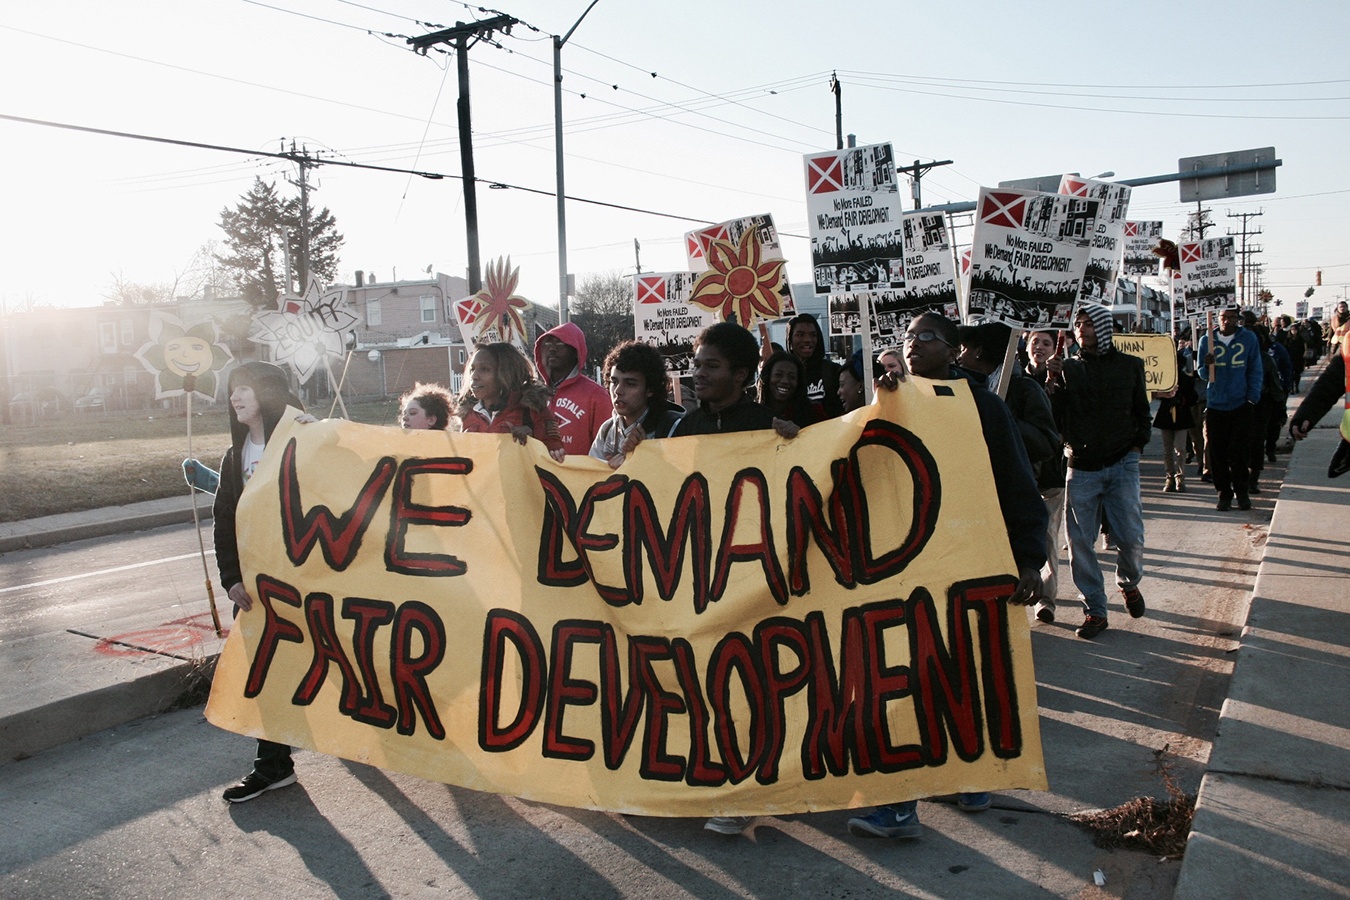 March to stop the incinerator. Photo by United Workers, December 2014.